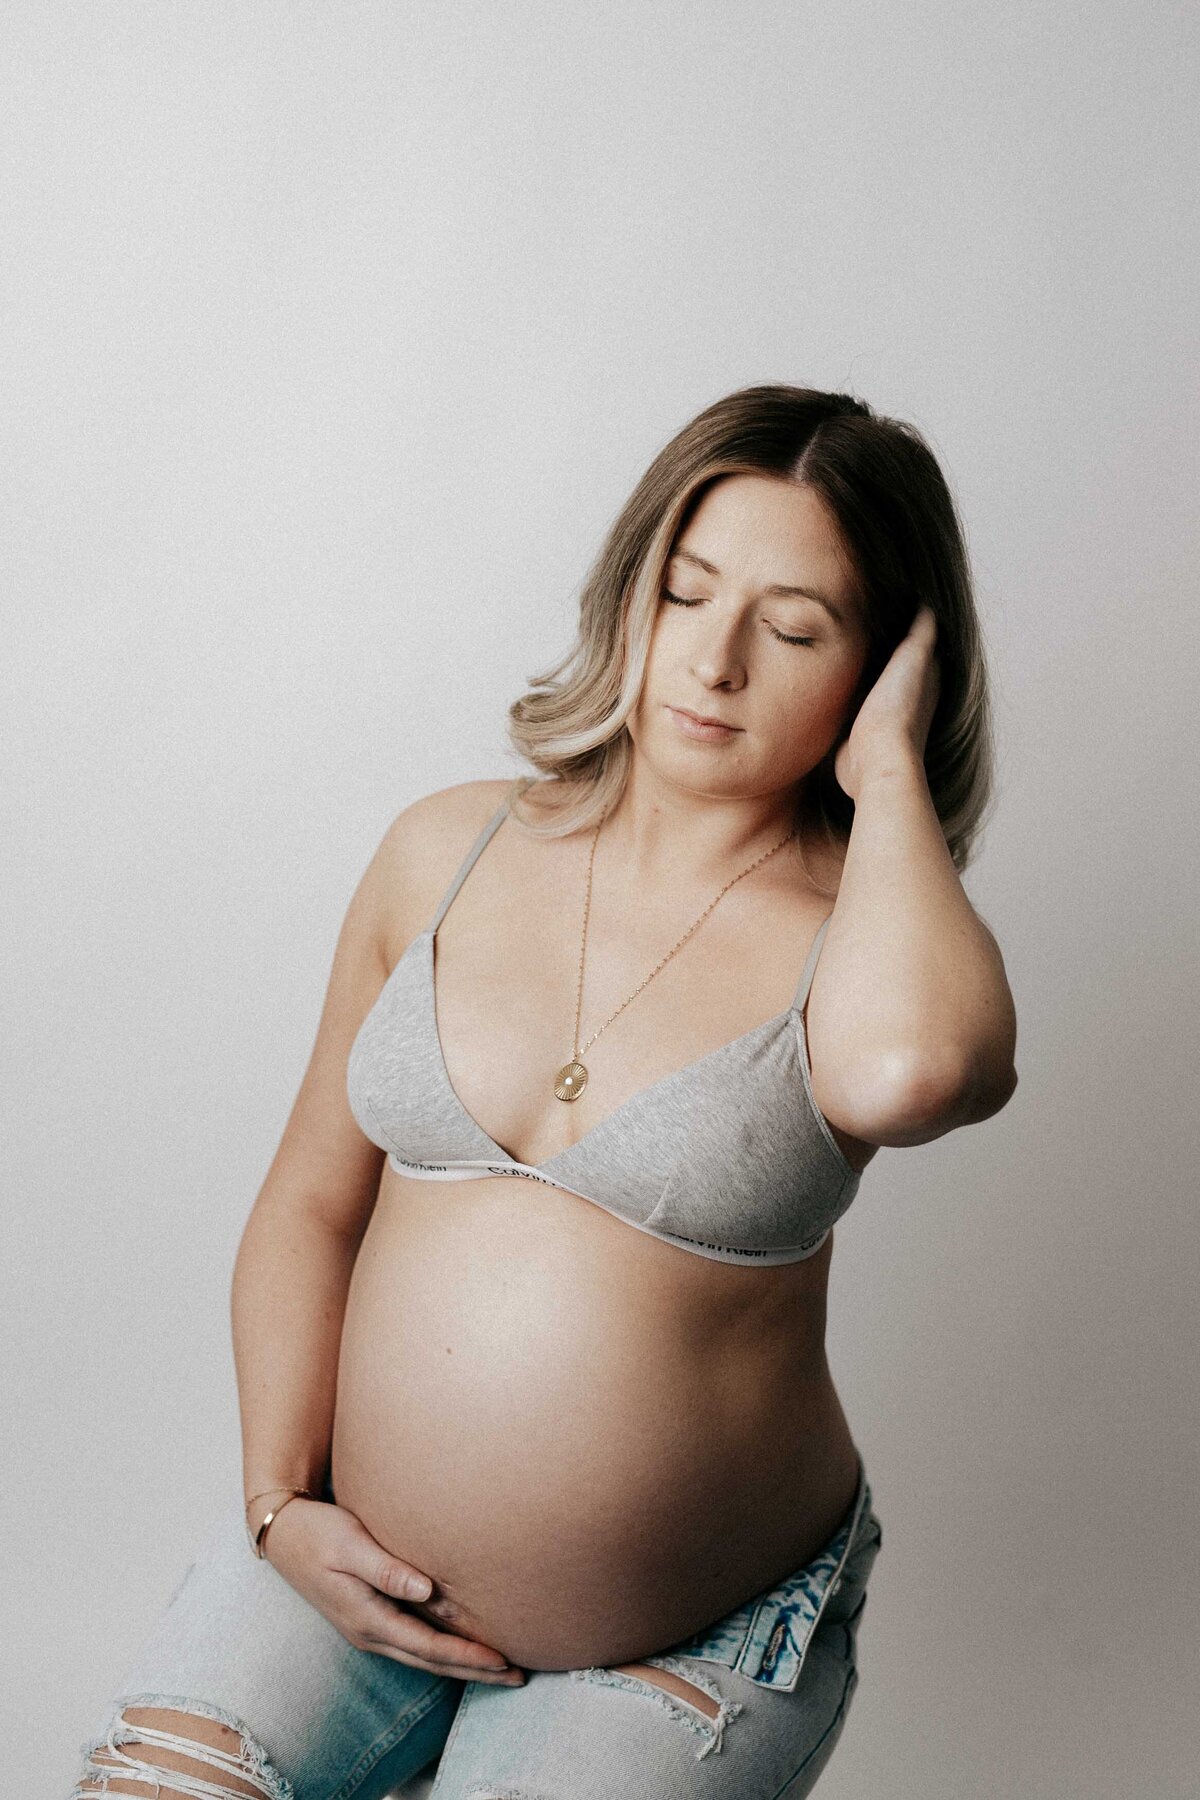 Studio maternity session. Mom is sitting on a stool with wearing distressed jeans and a grey bralette with her bump exposed. She is holding her bump and brushing the hair out of her face.